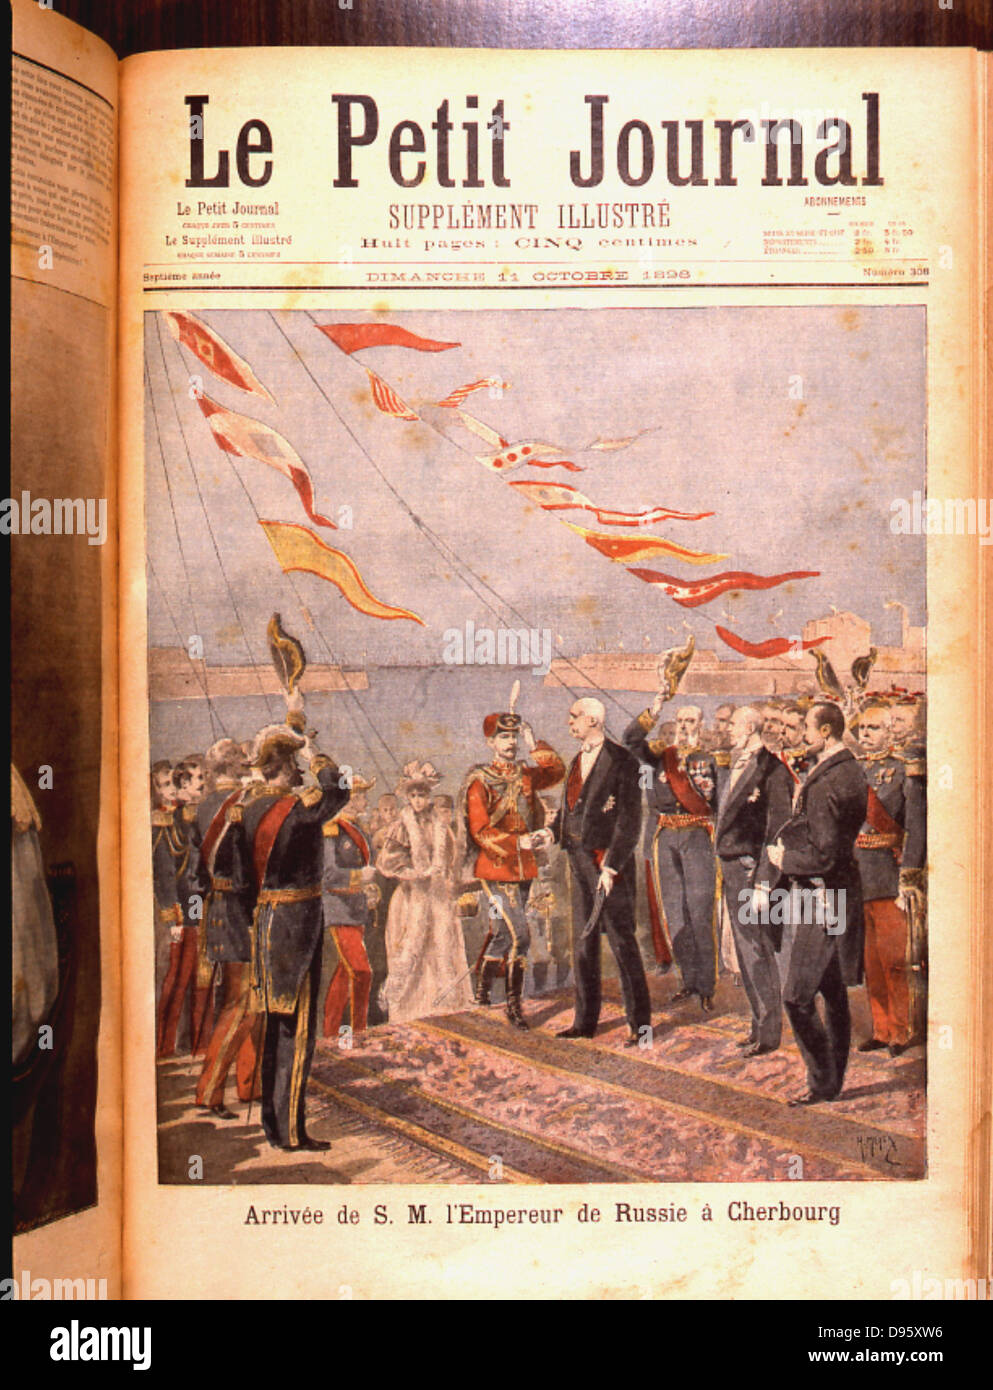 Russian foreign policy. Nicholas II (1868-1919) Tsar of Russia from 1894, arriving at Dunkirk, France, on a state visit.  From 'Le Petit Journal',  Paris, 29 December 1901. Stock Photo